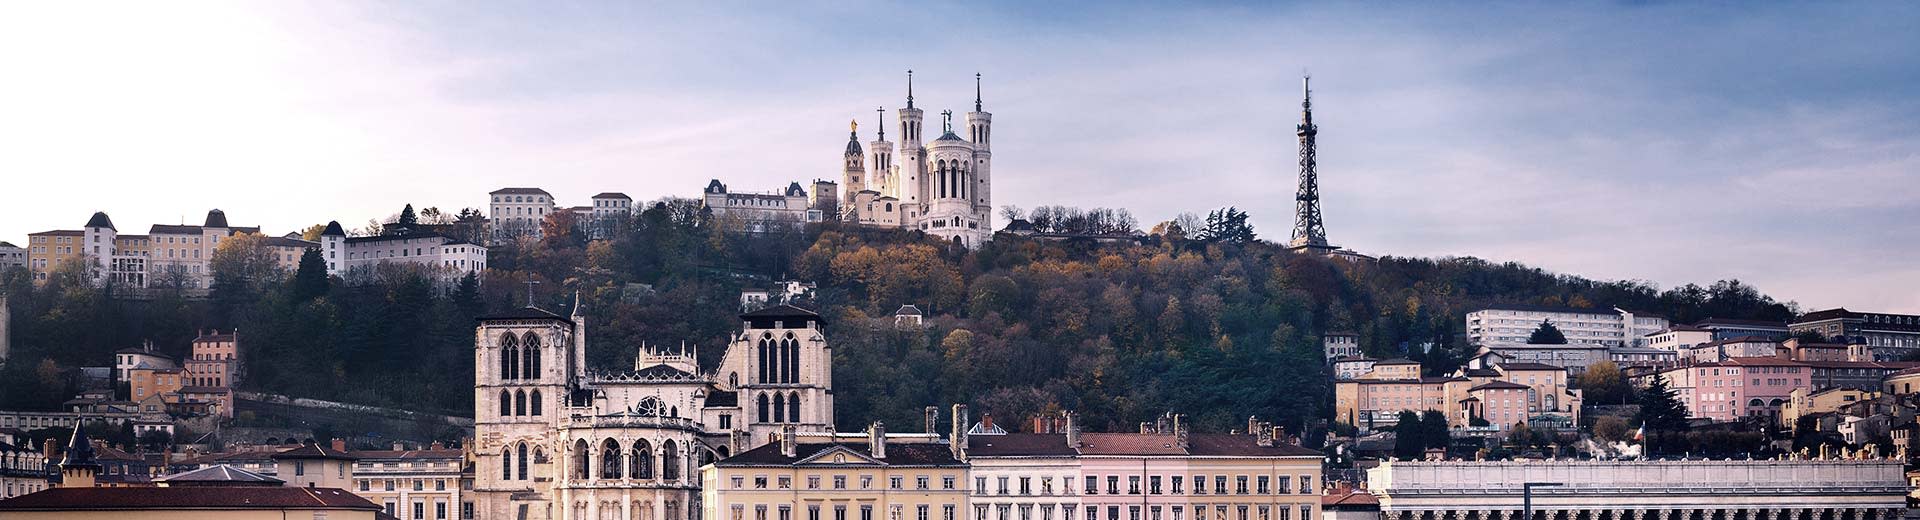 Church steeples above the beautiful French city of Lyon.